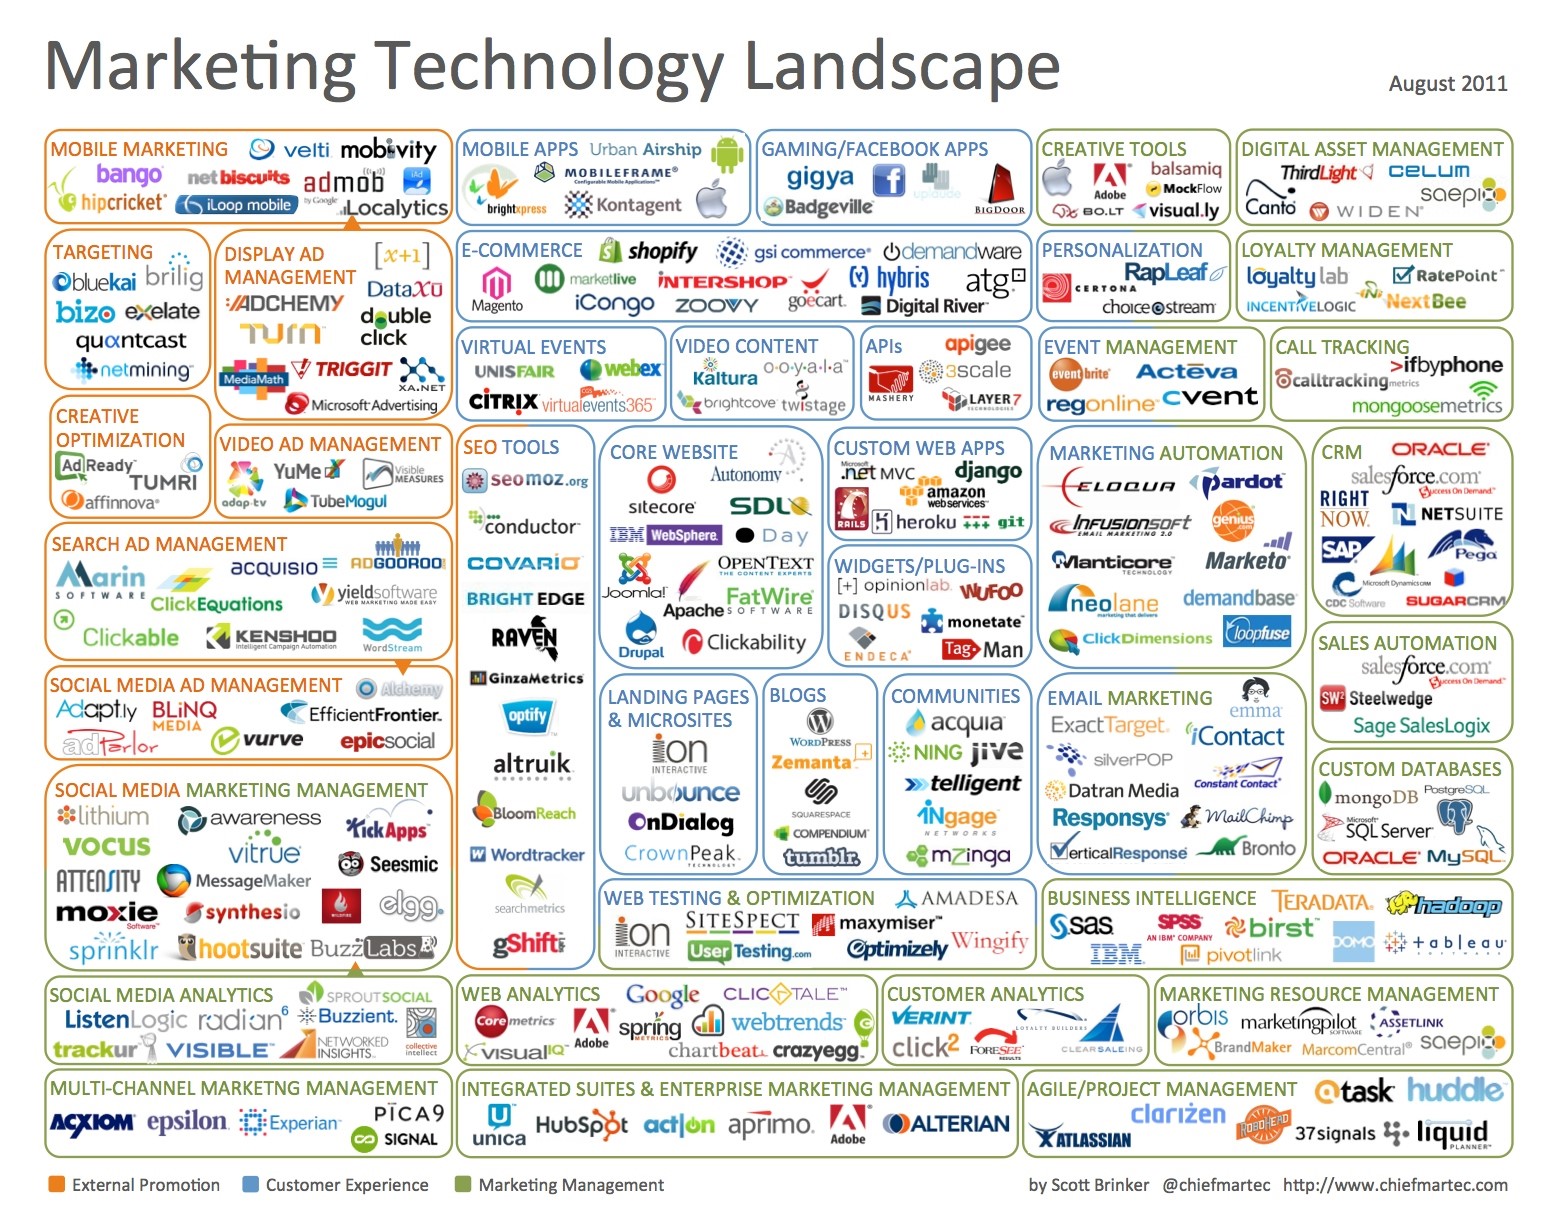 How to Tackle the MarTech Explosion with Better Integration